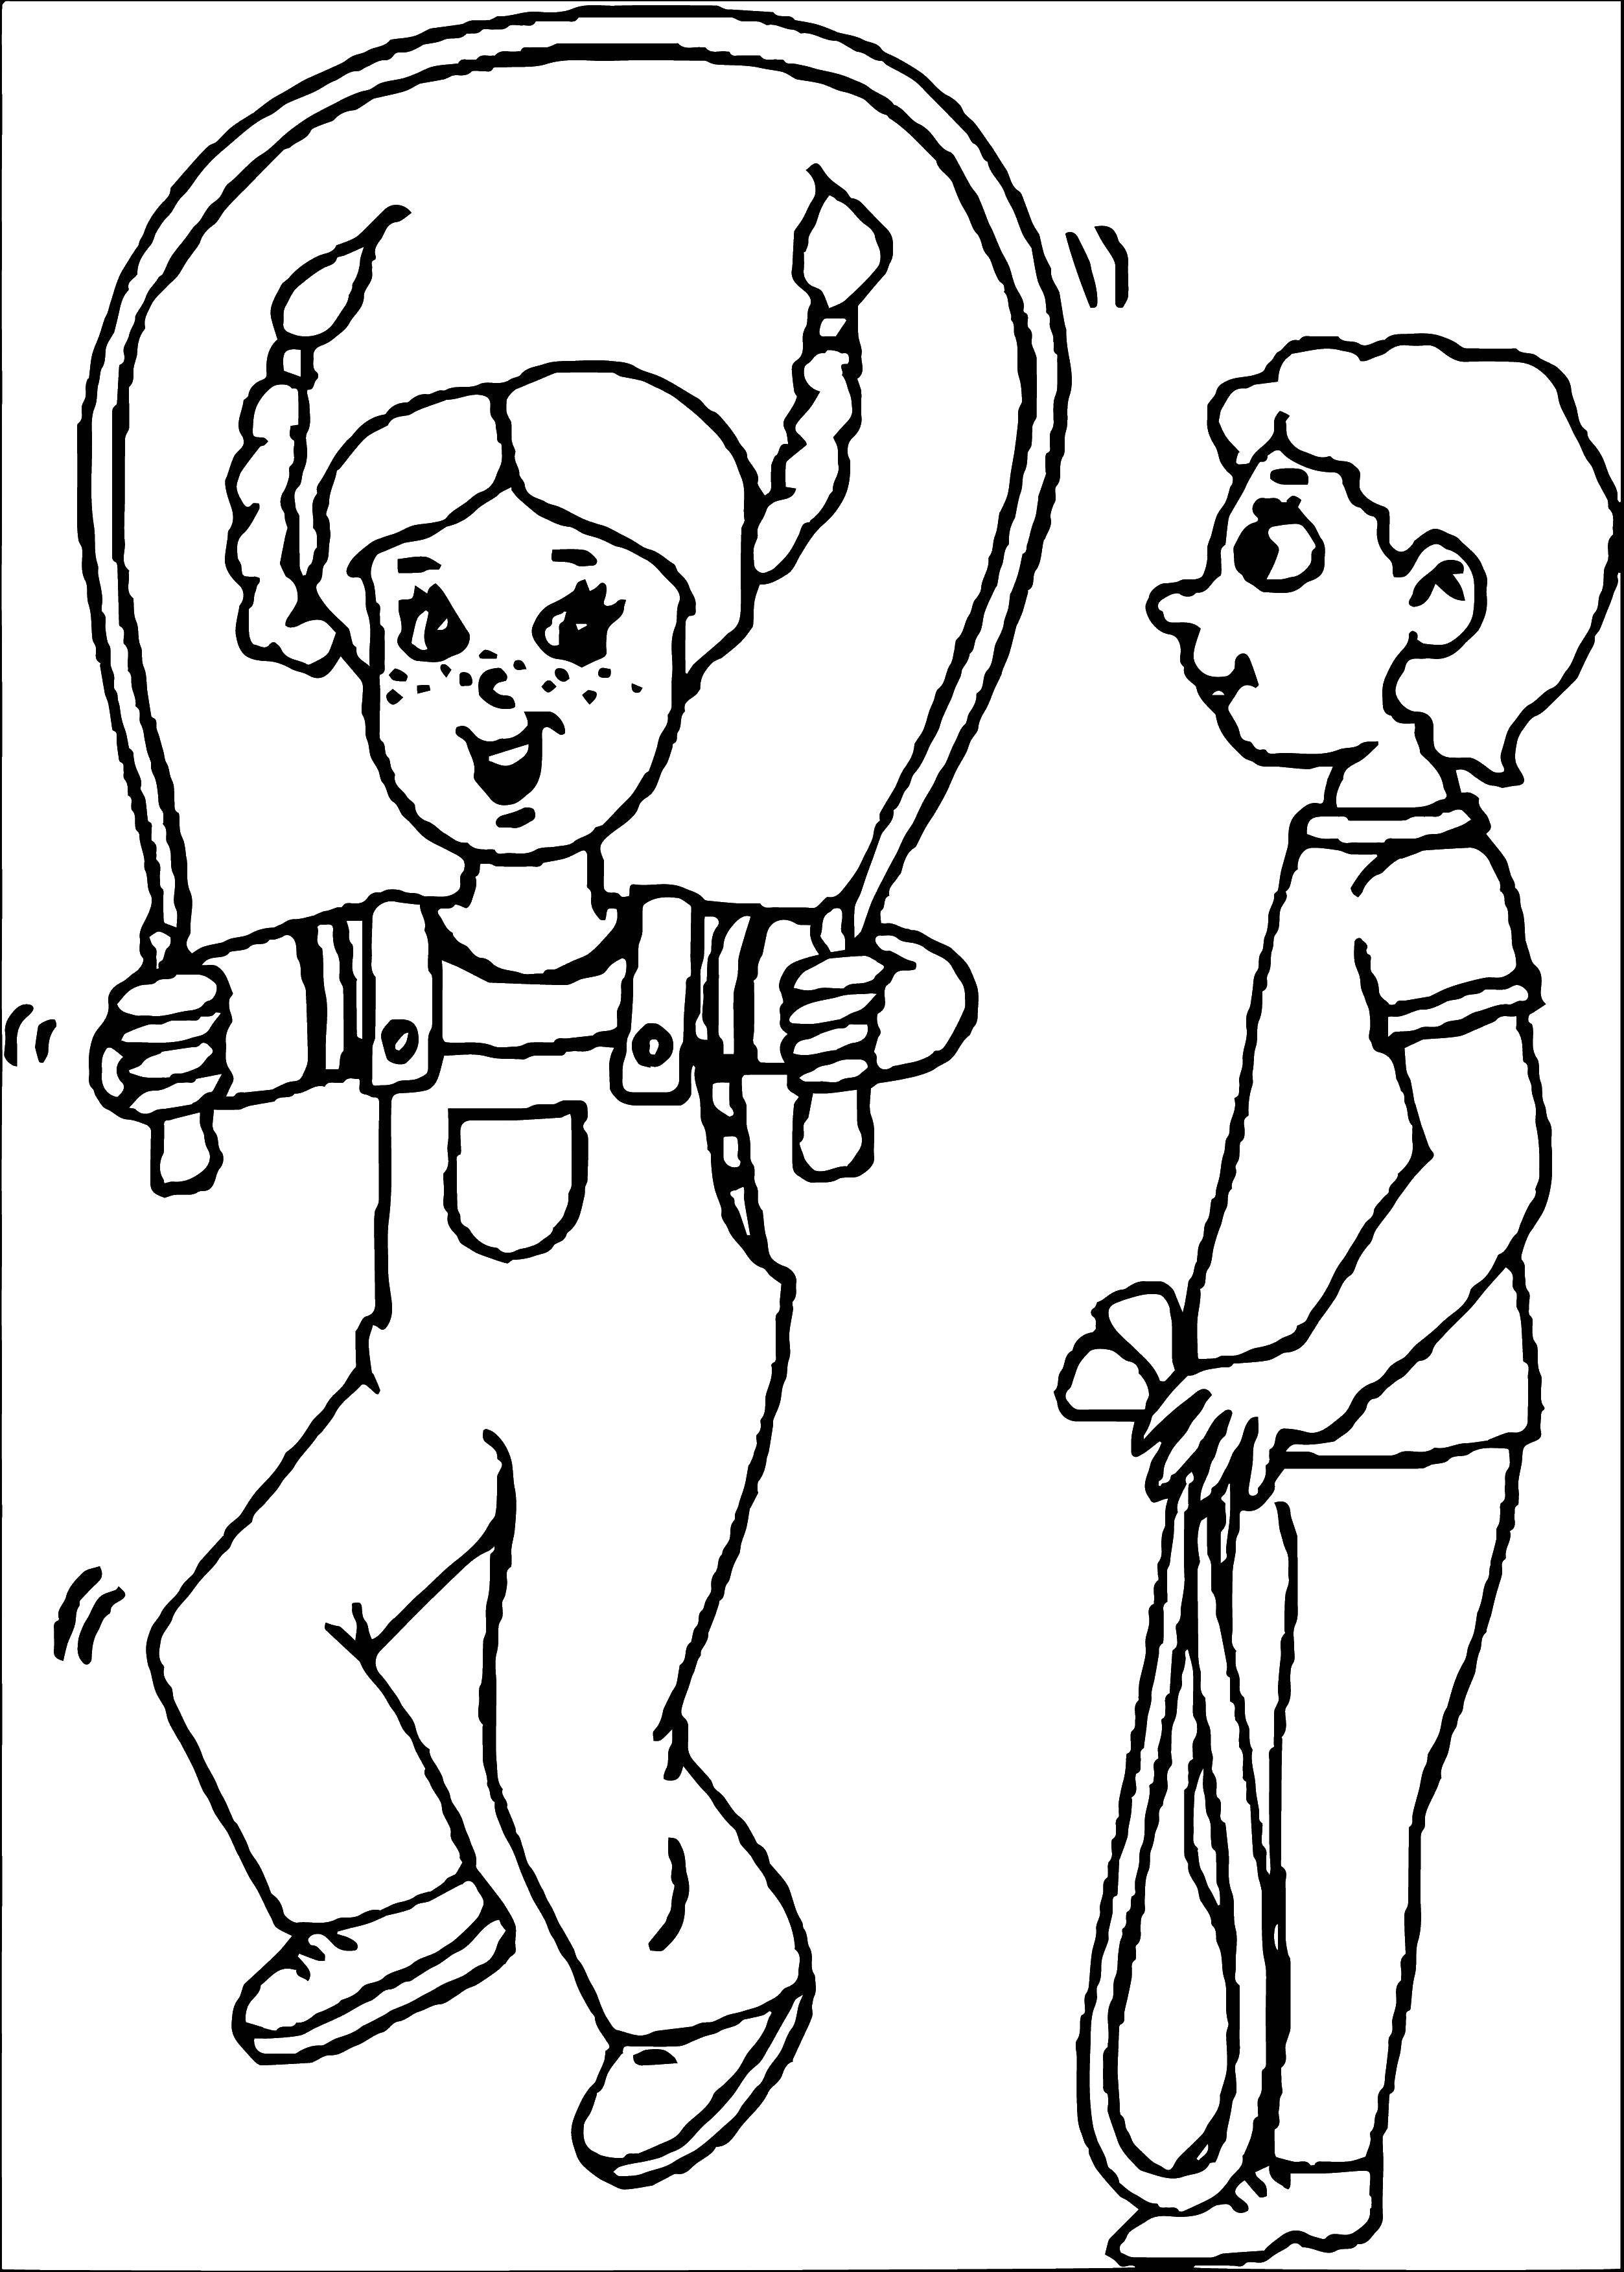 Coloring Children with a skipping rope. Category The jump. Tags:  Sports, jump rope.